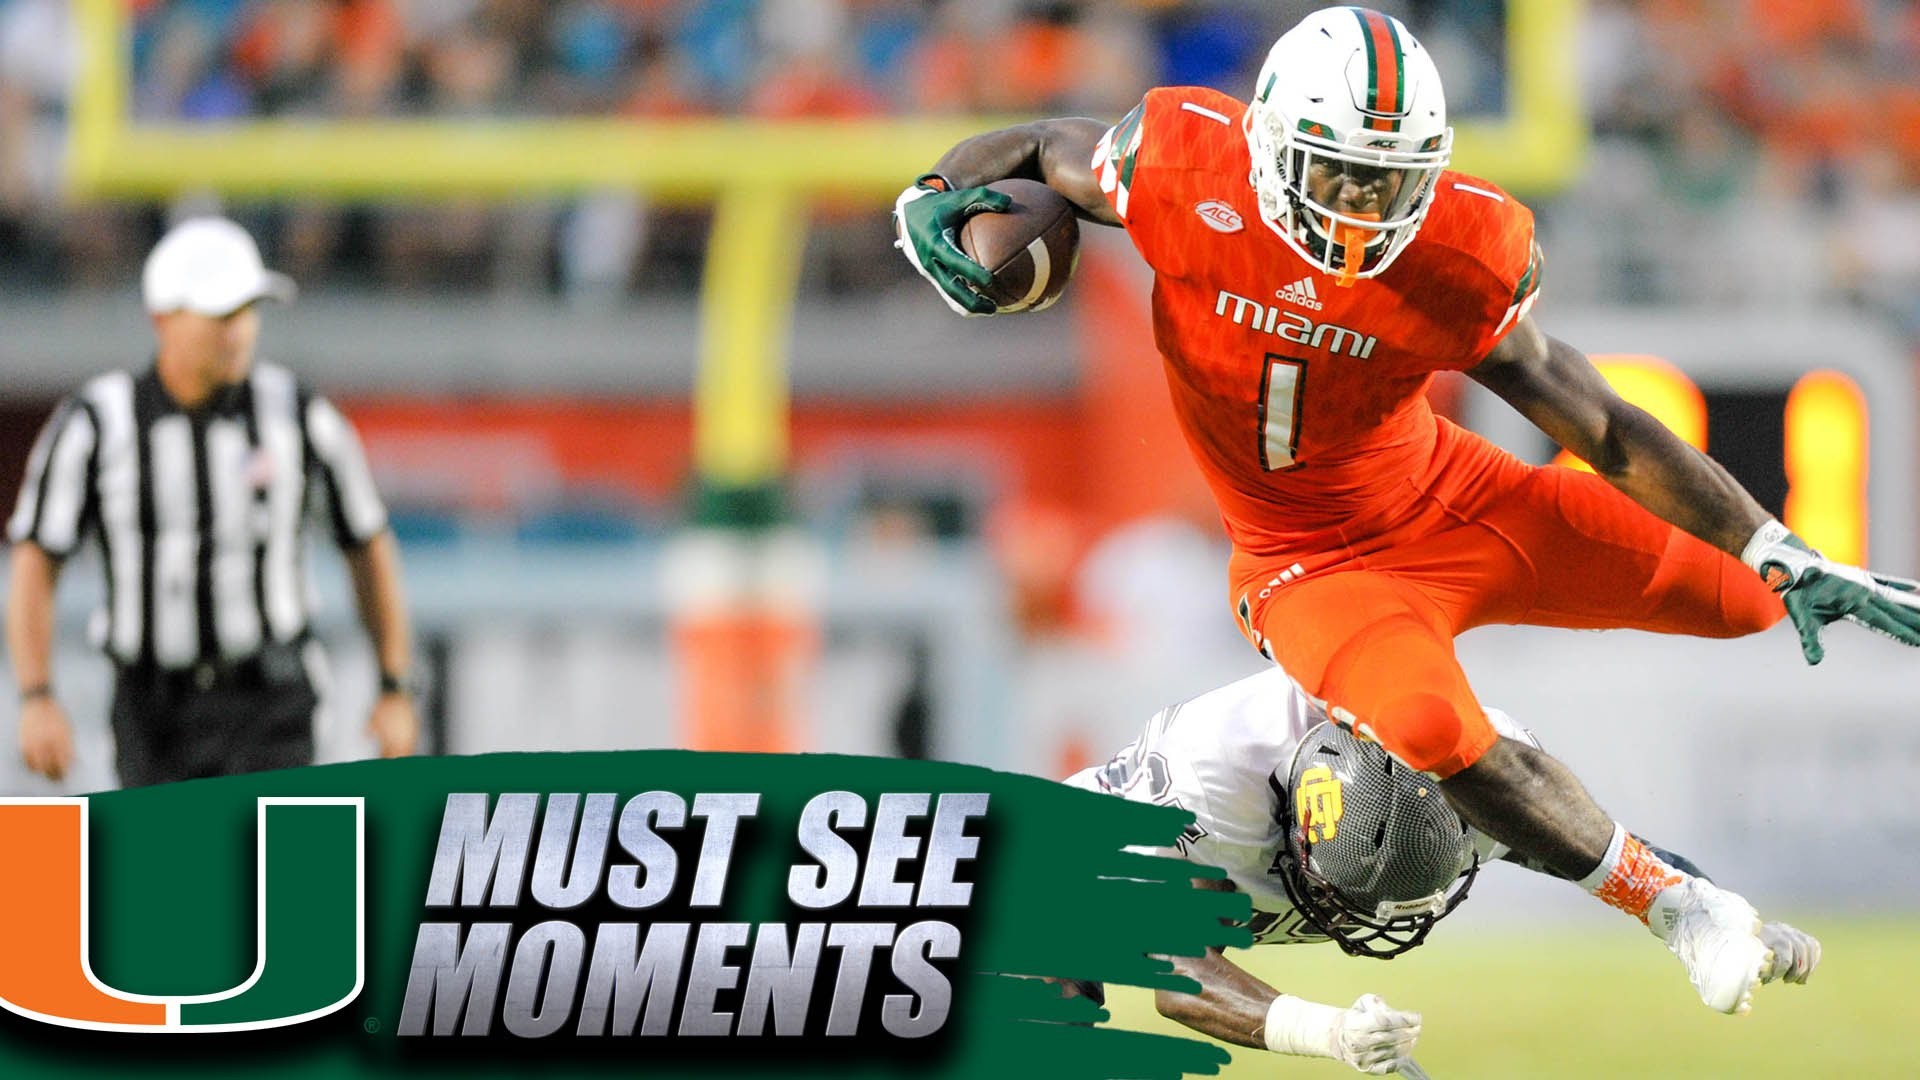 1920x1080 Miami Hurricanes Football: 21 Points in 2 Minutes | ACC Must See Moment -  YouTube